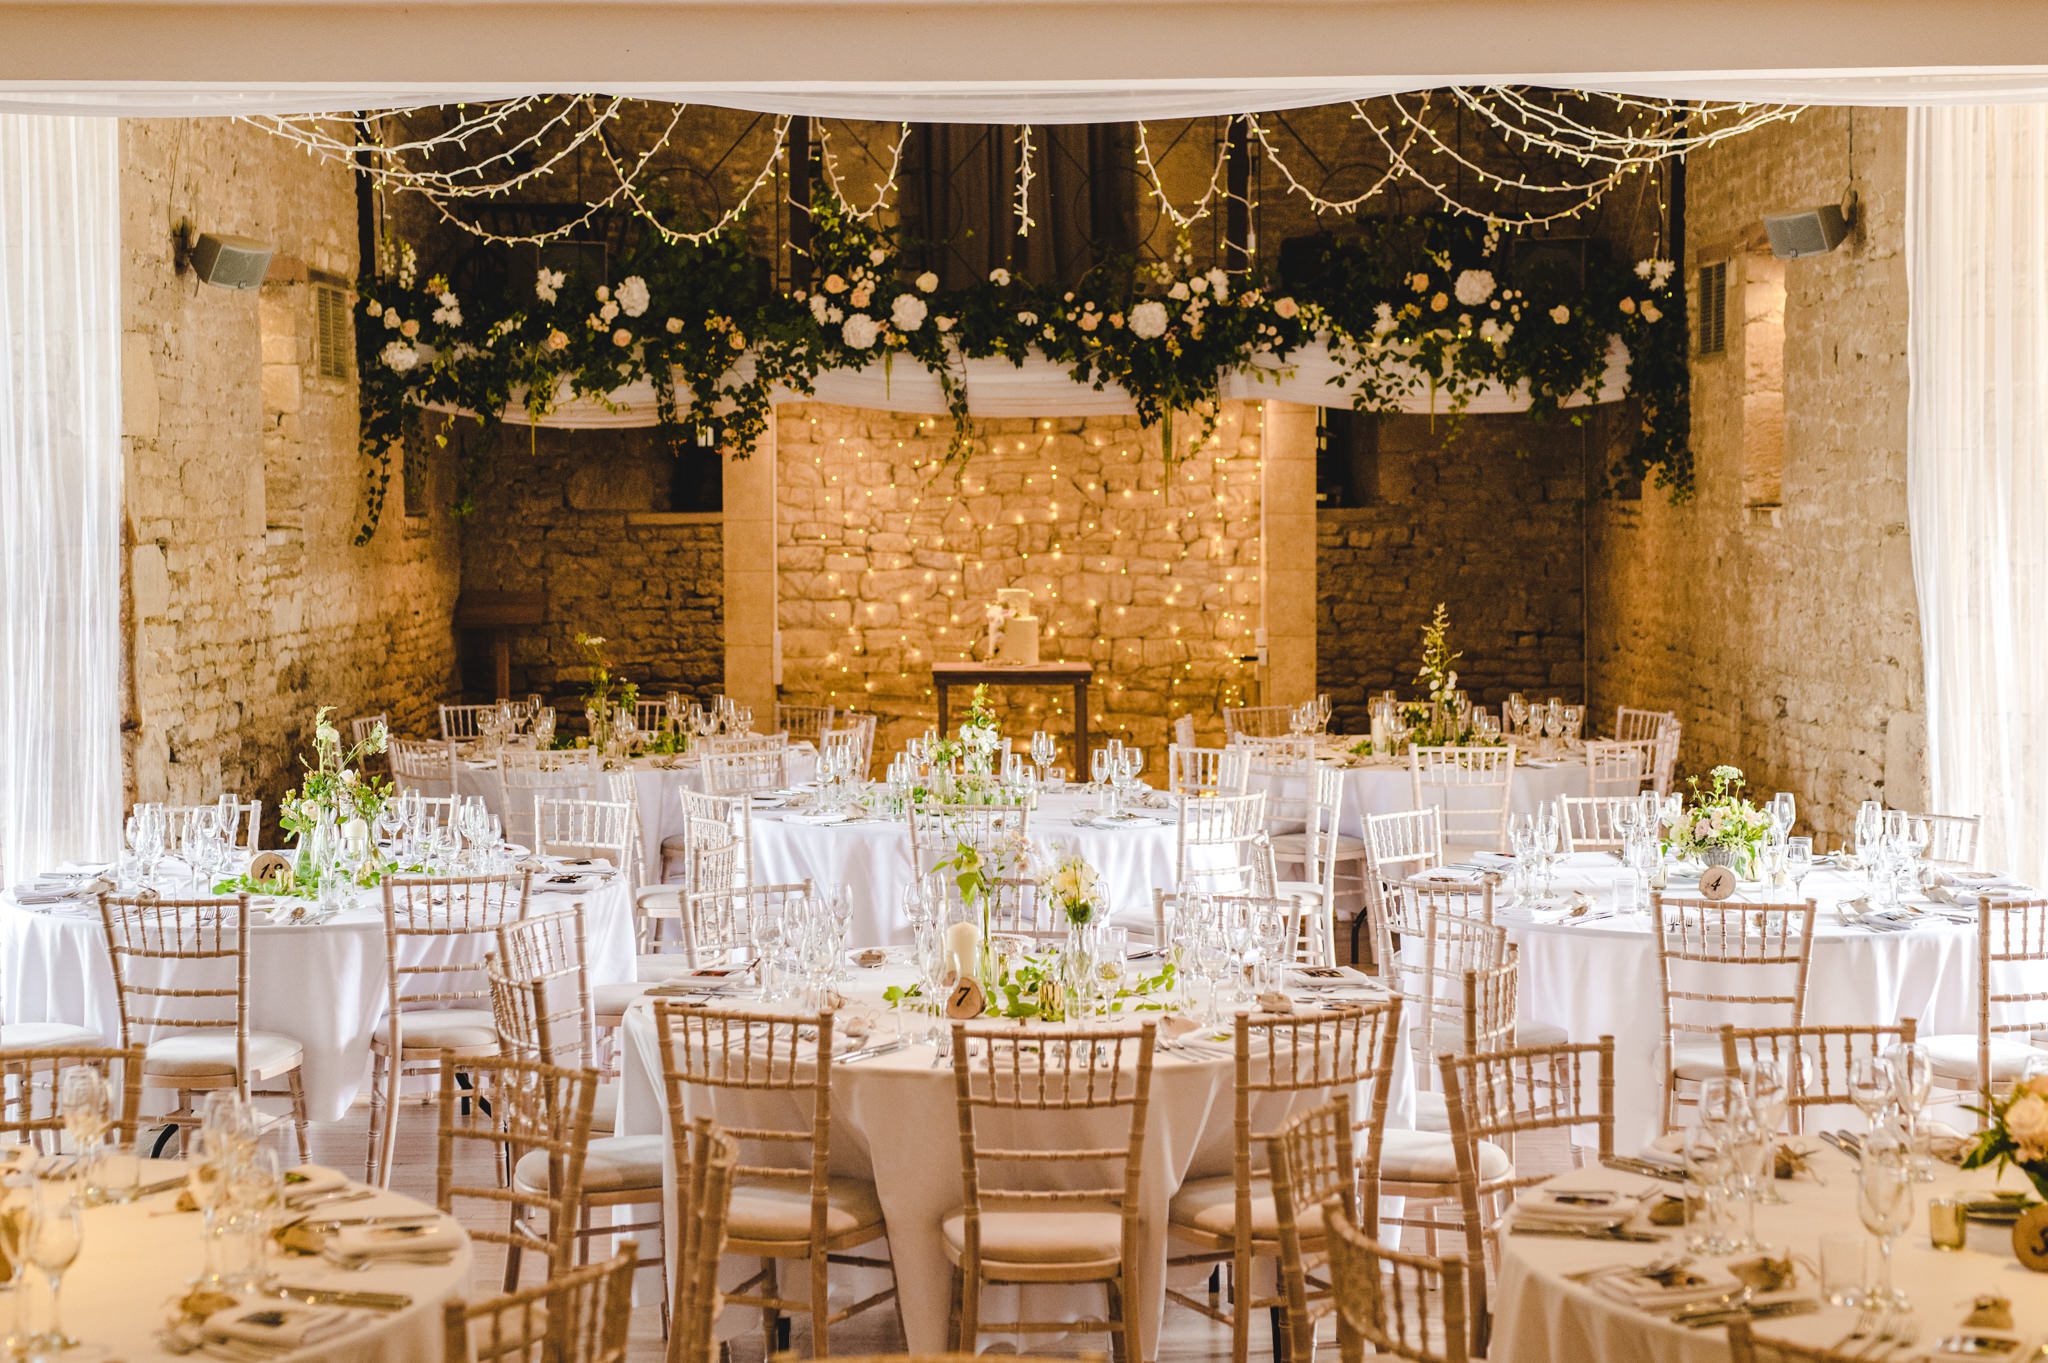 Great Tythe Barn styling set up for wedding breakfast